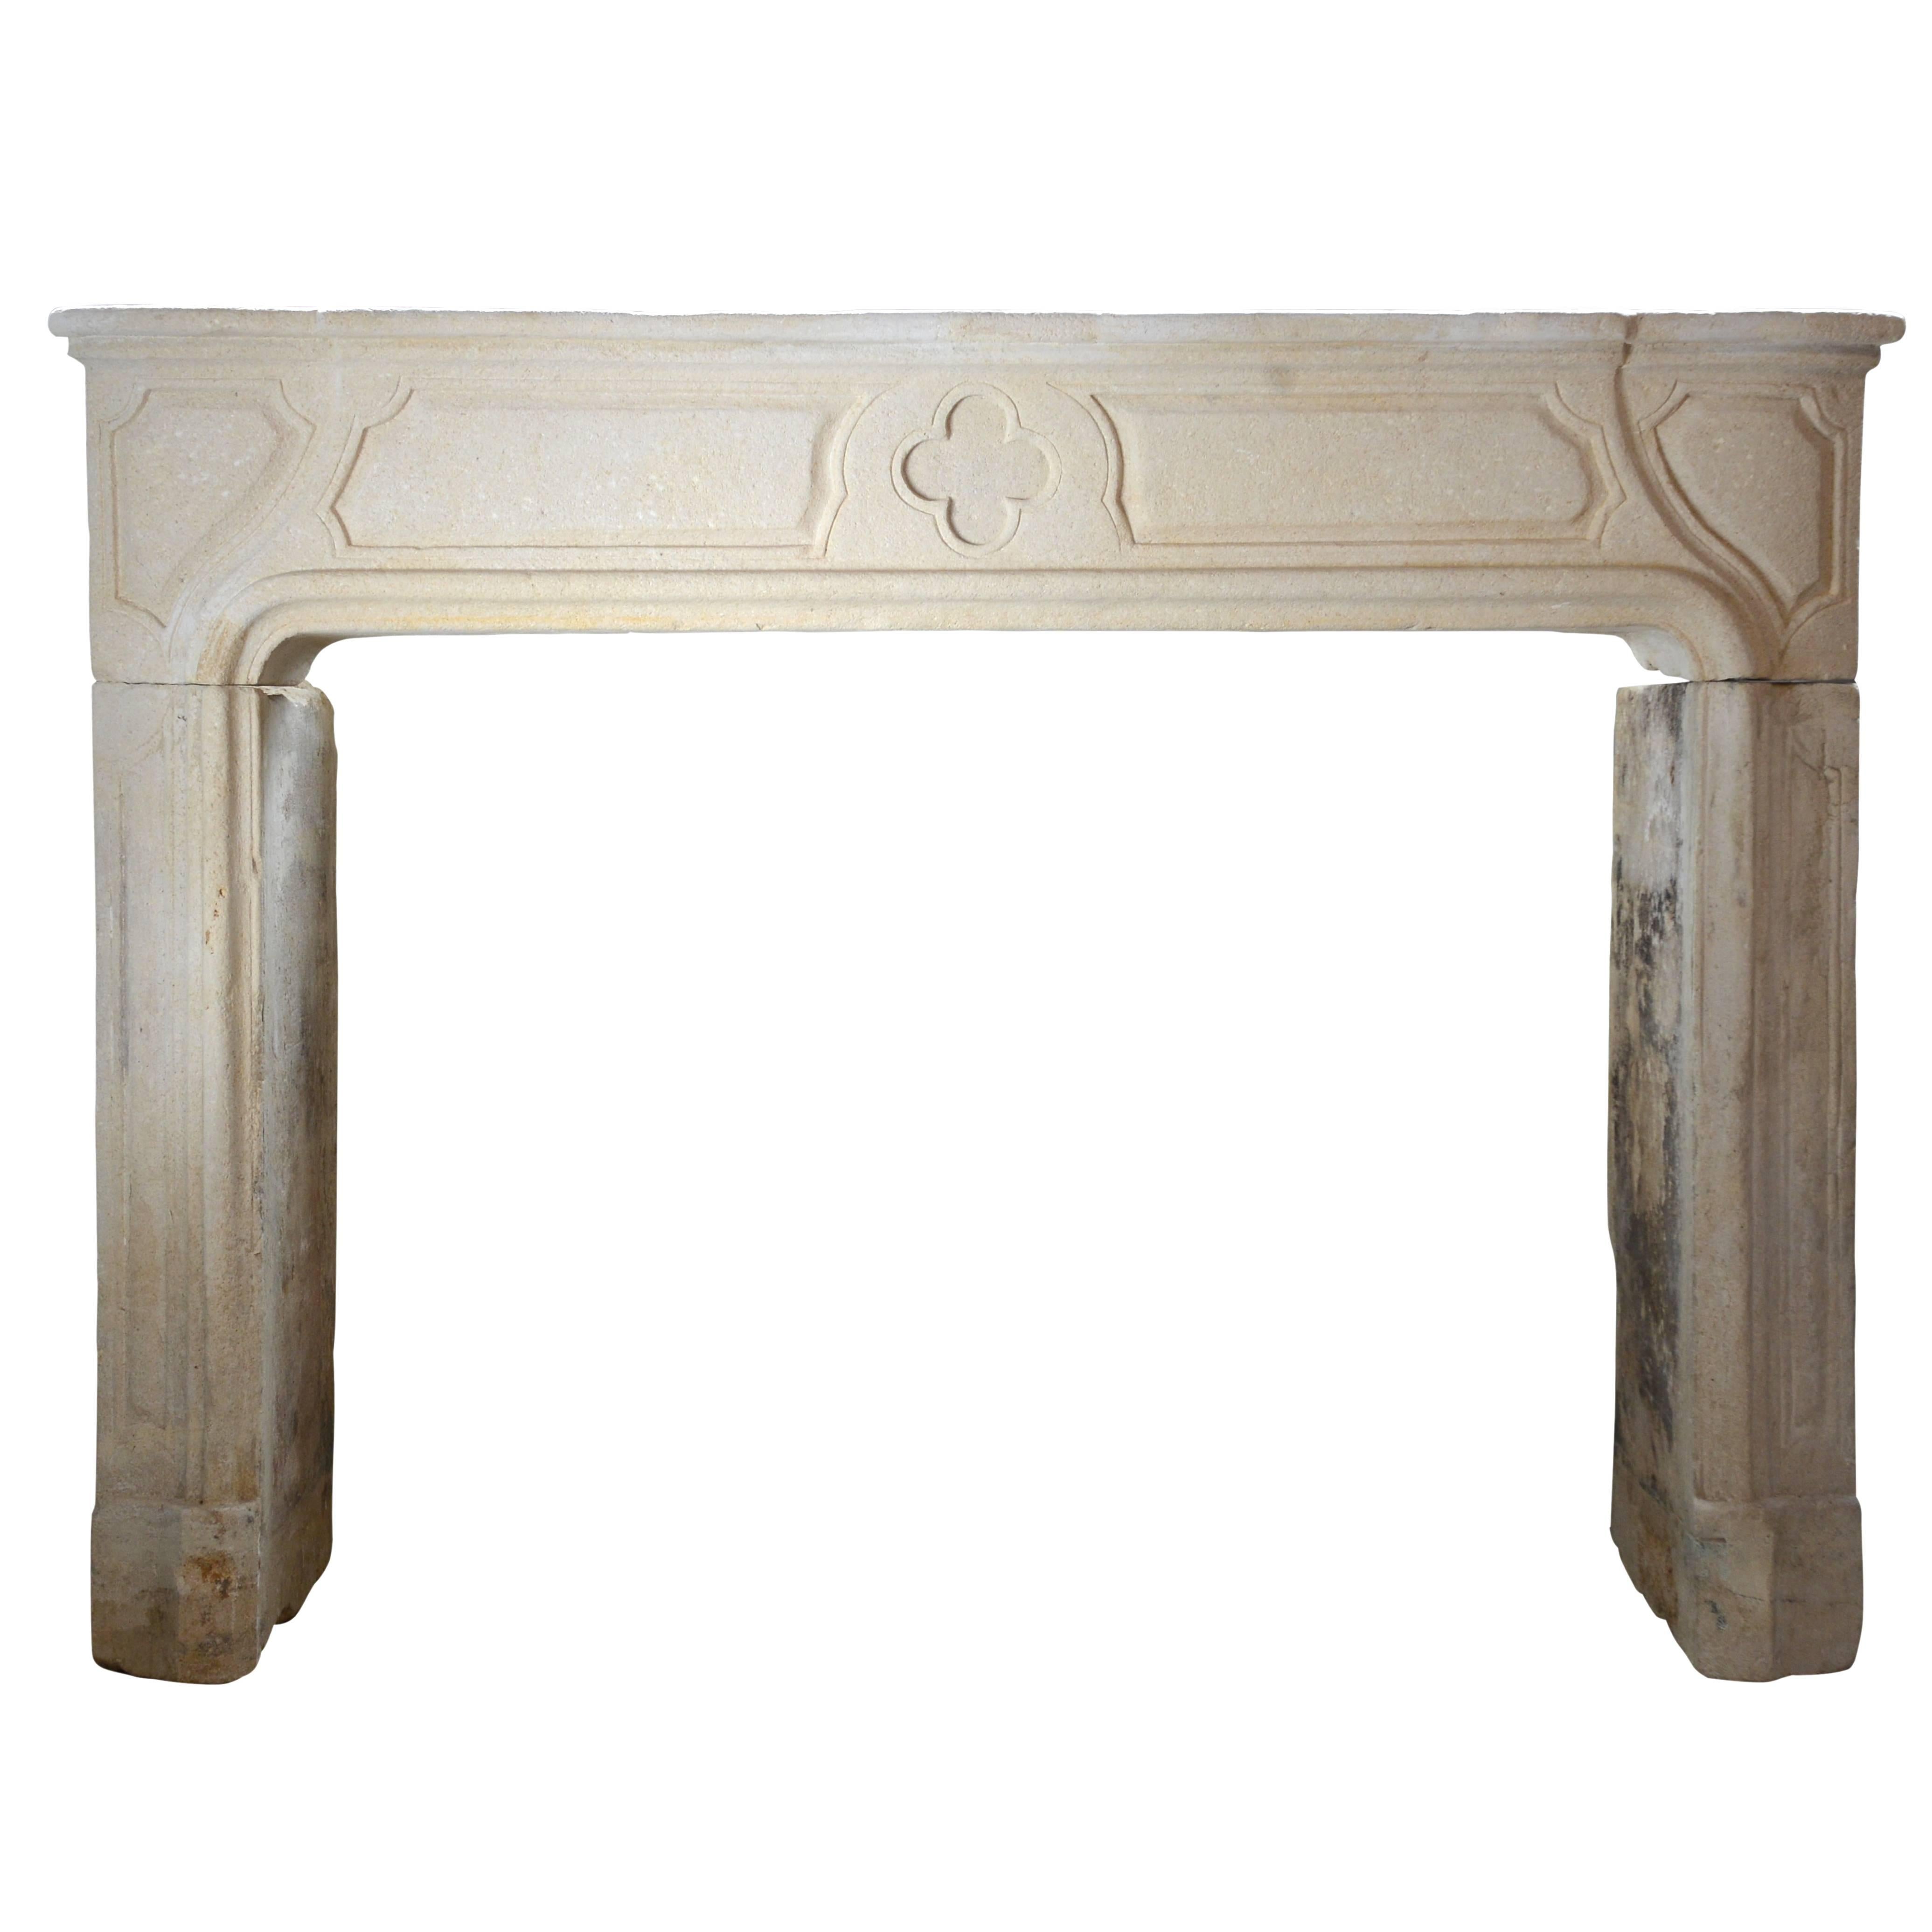 Louis XIV Stone Fireplace, 18th Century For Sale